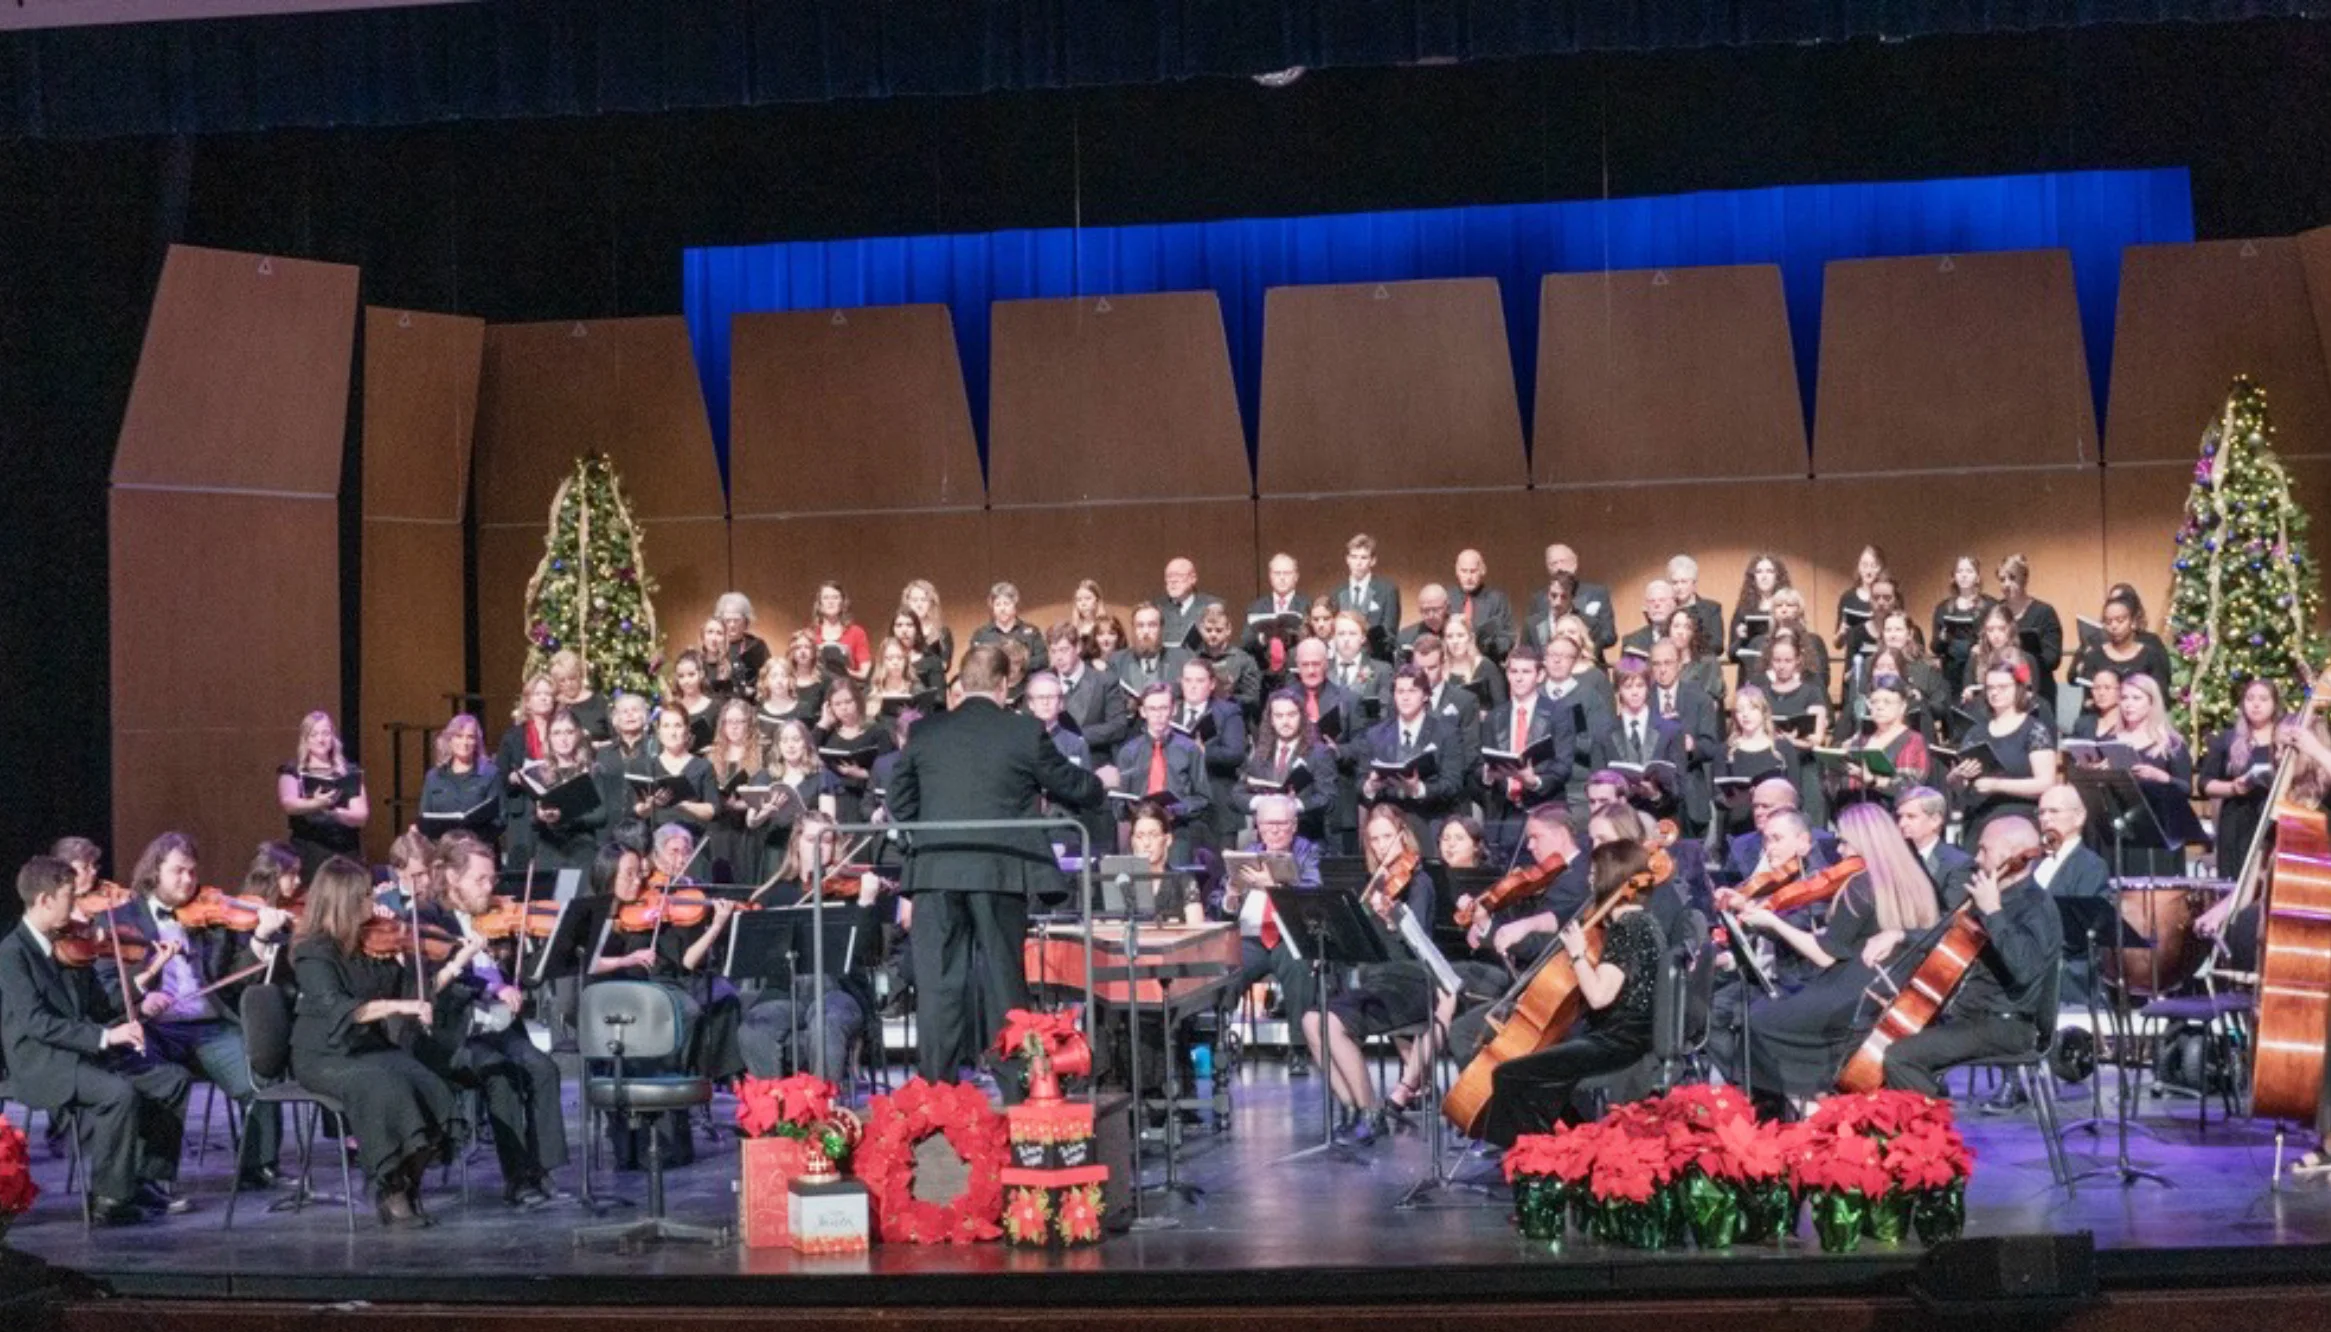 87th annual performance of Messiah